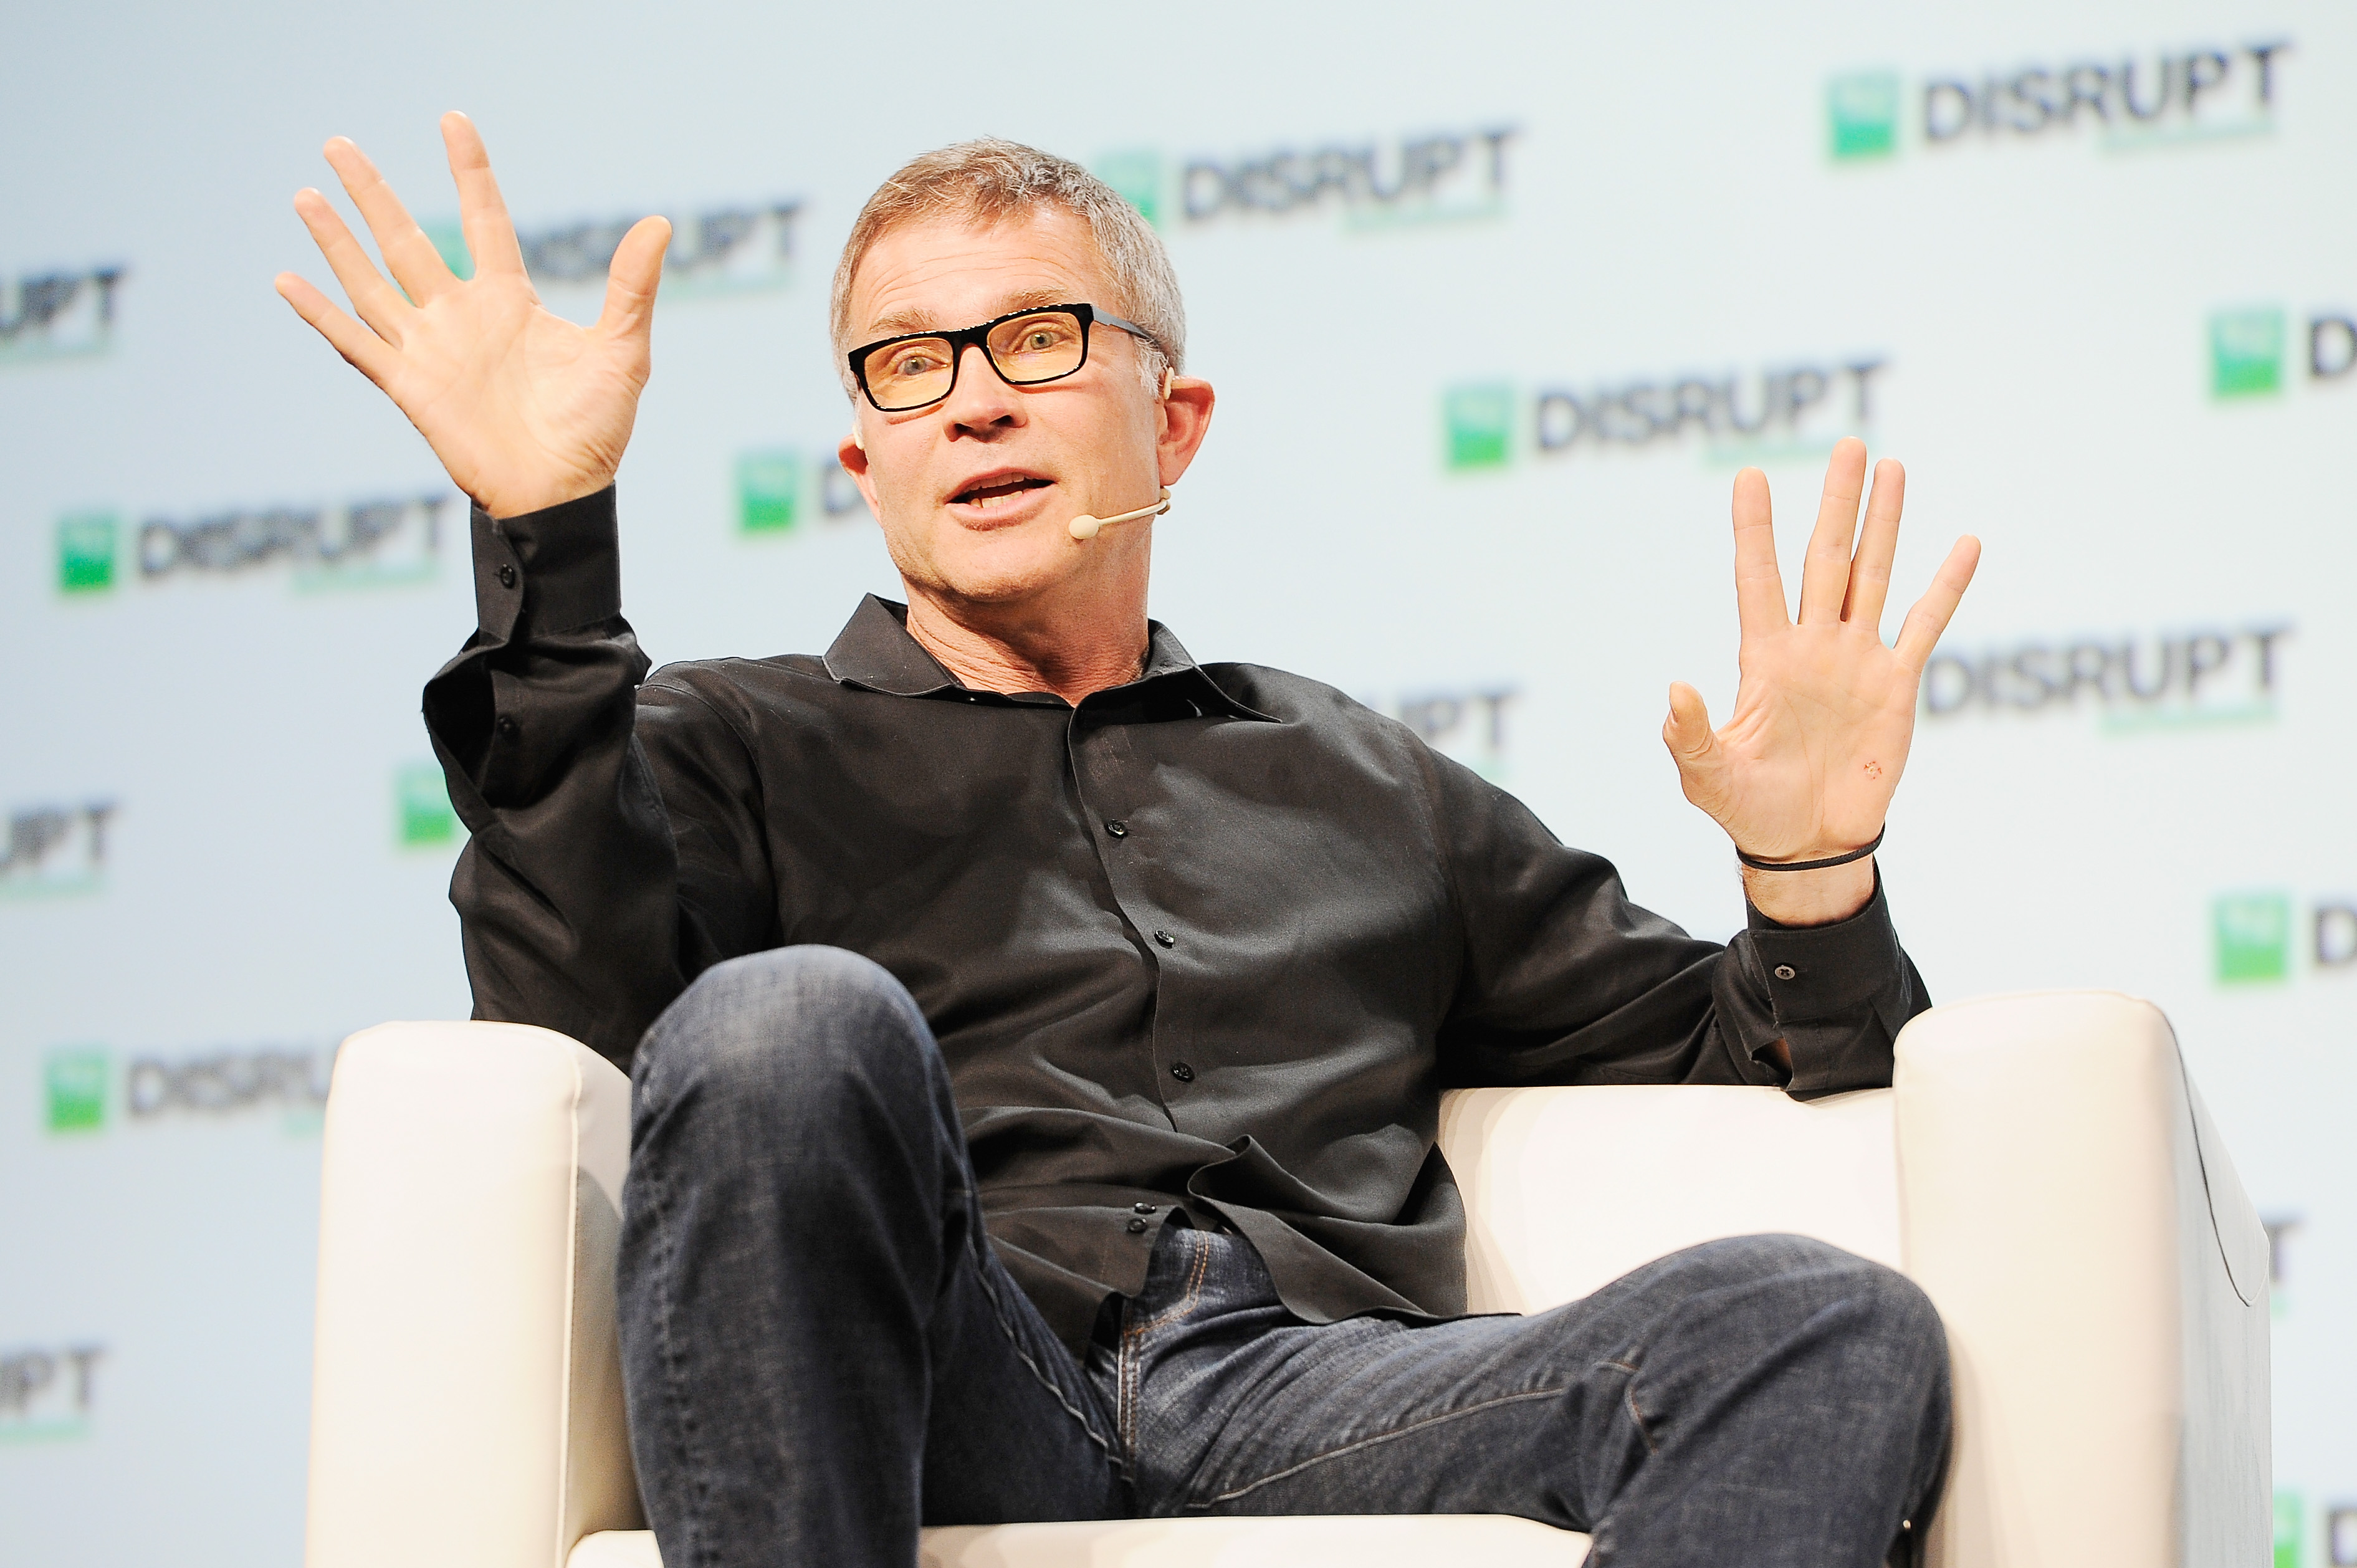 SAN FRANCISCO, CA - SEPTEMBER 05: Roblox Corporation Founder and CEO David Baszucki speaks onstage during Day 1 of TechCrunch Disrupt SF 2018 at Moscone Center on September 5, 2018 in San Francisco, California.